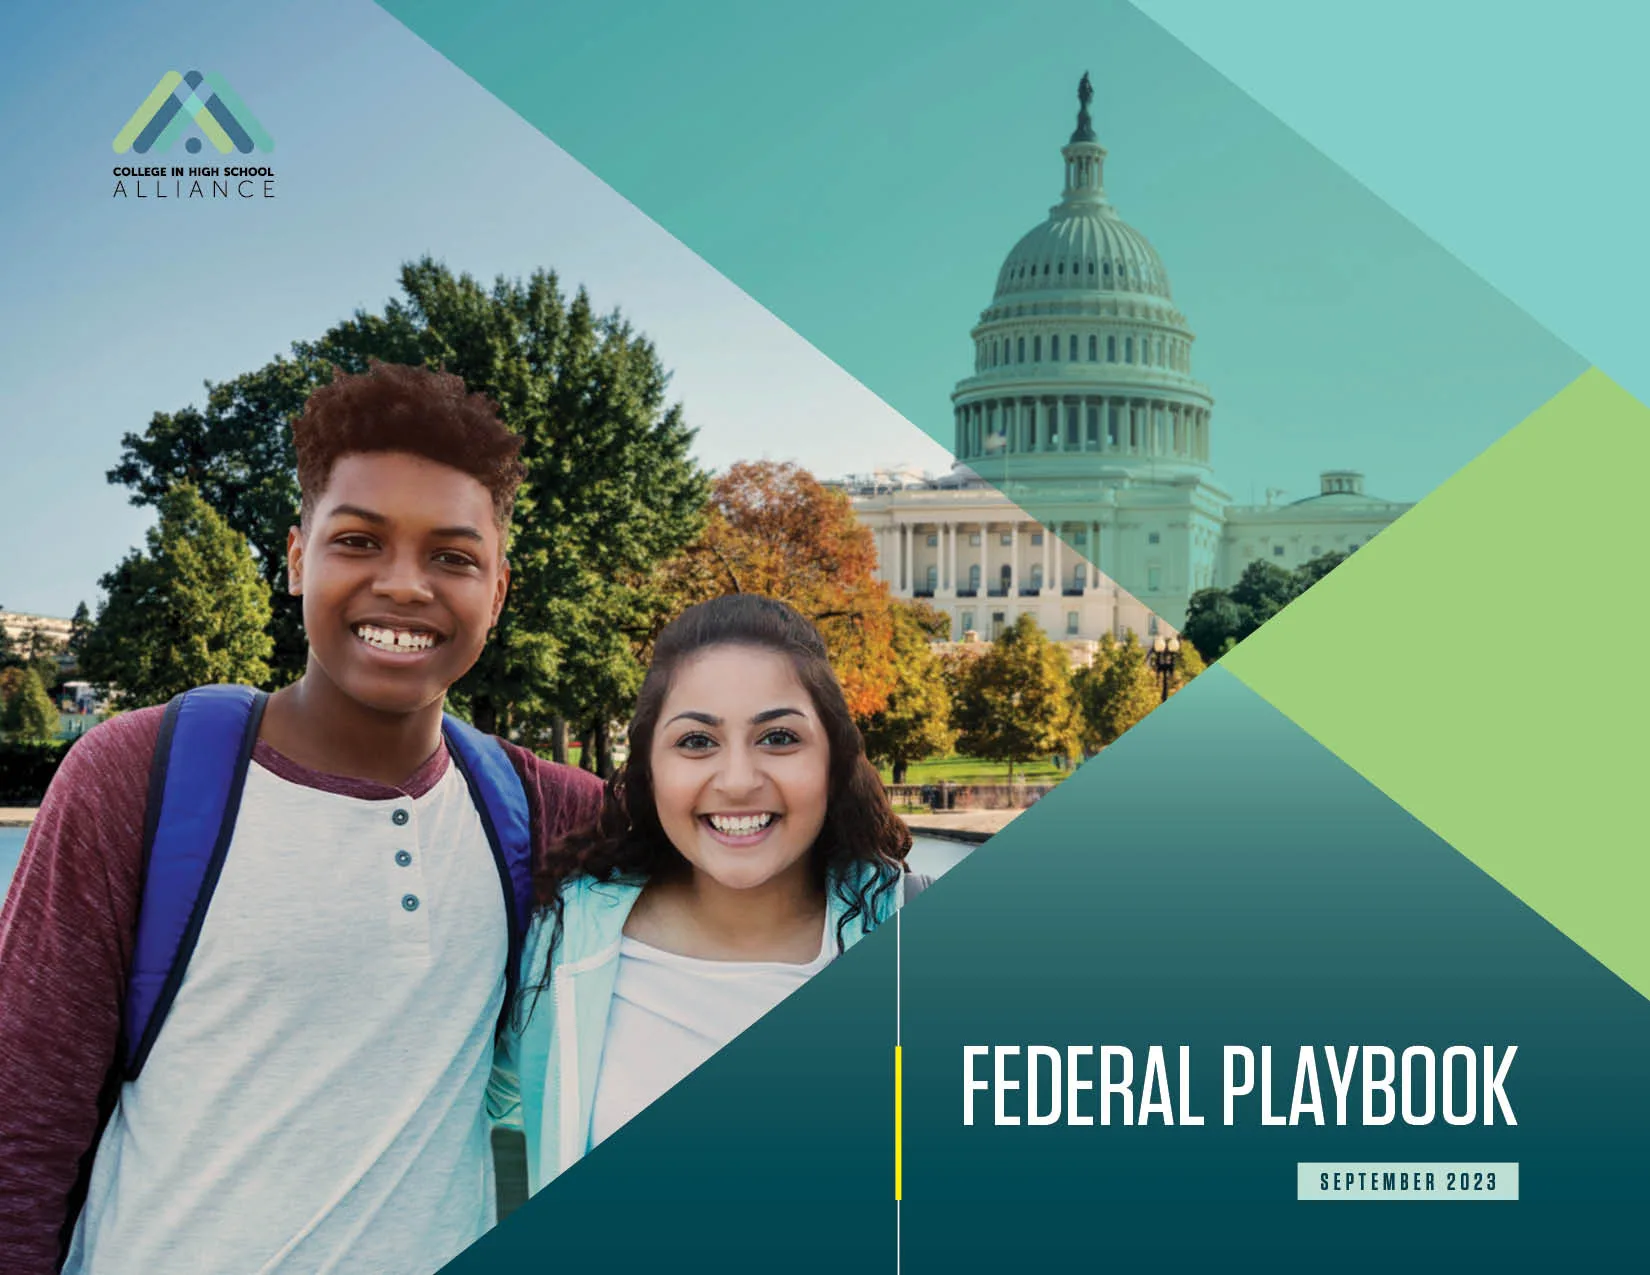 Cover image for the College in High School Alliance's Federal Playbook